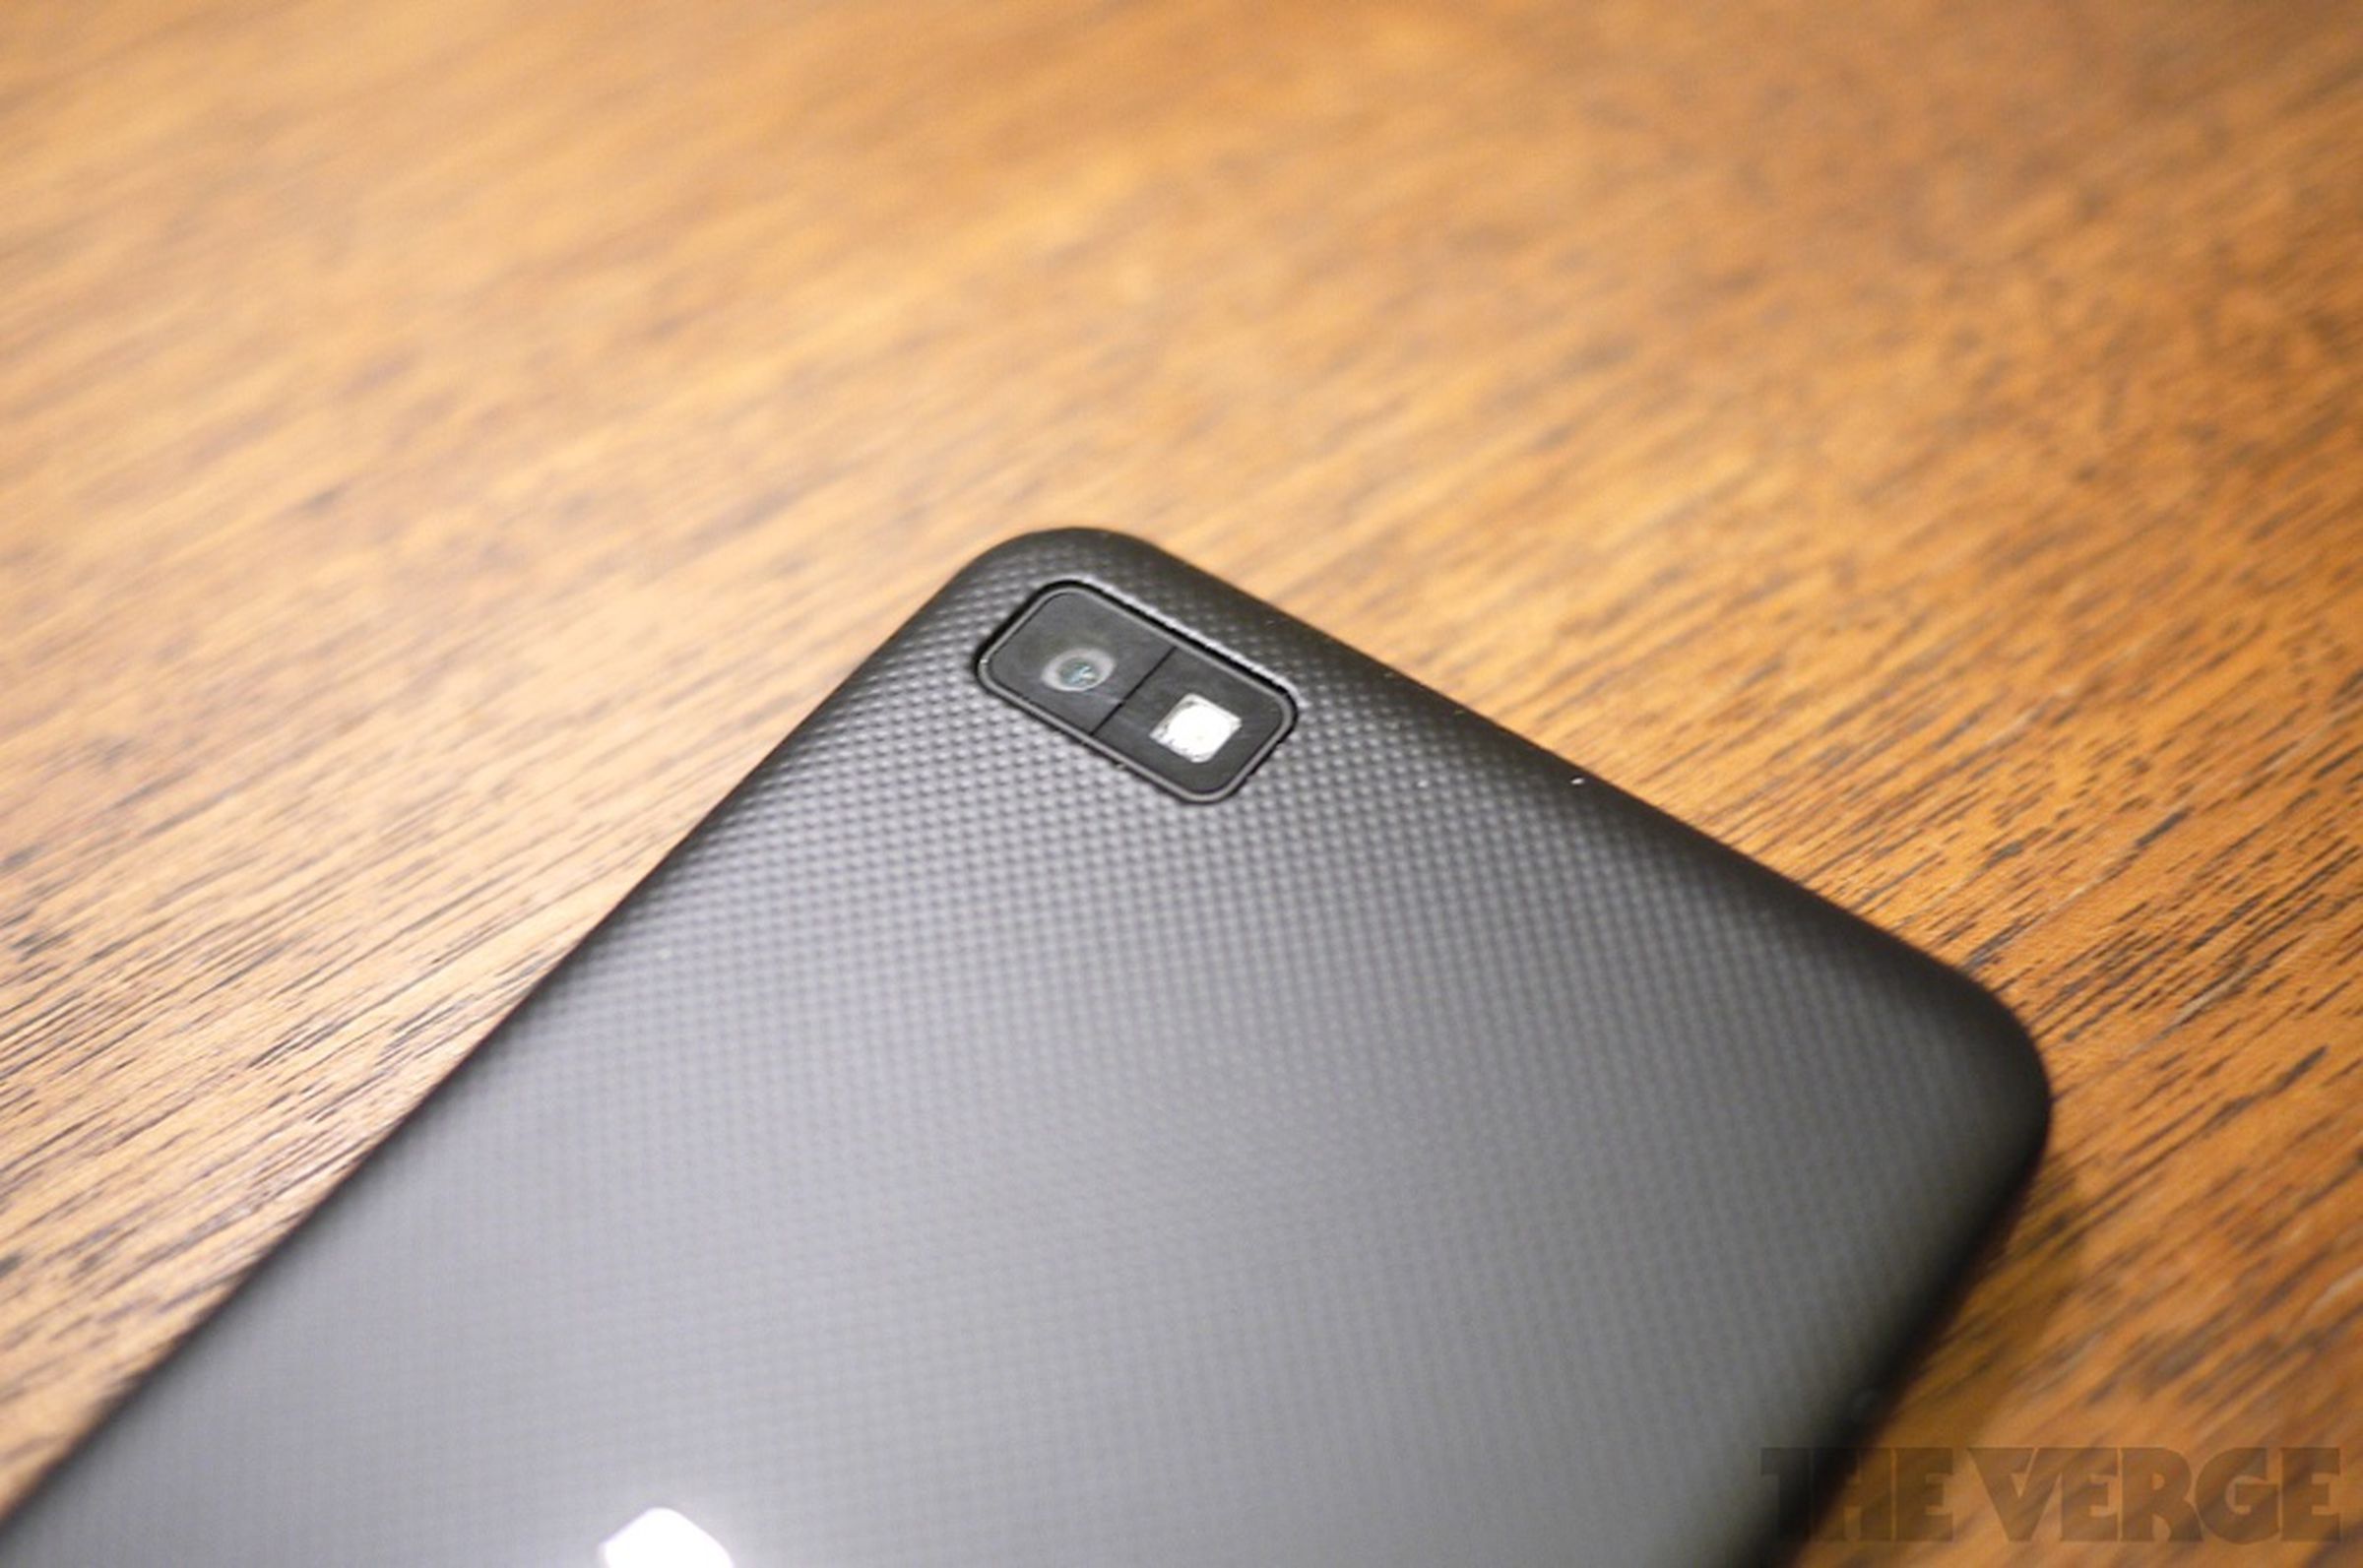 BlackBerry Z10 hands-on pictures